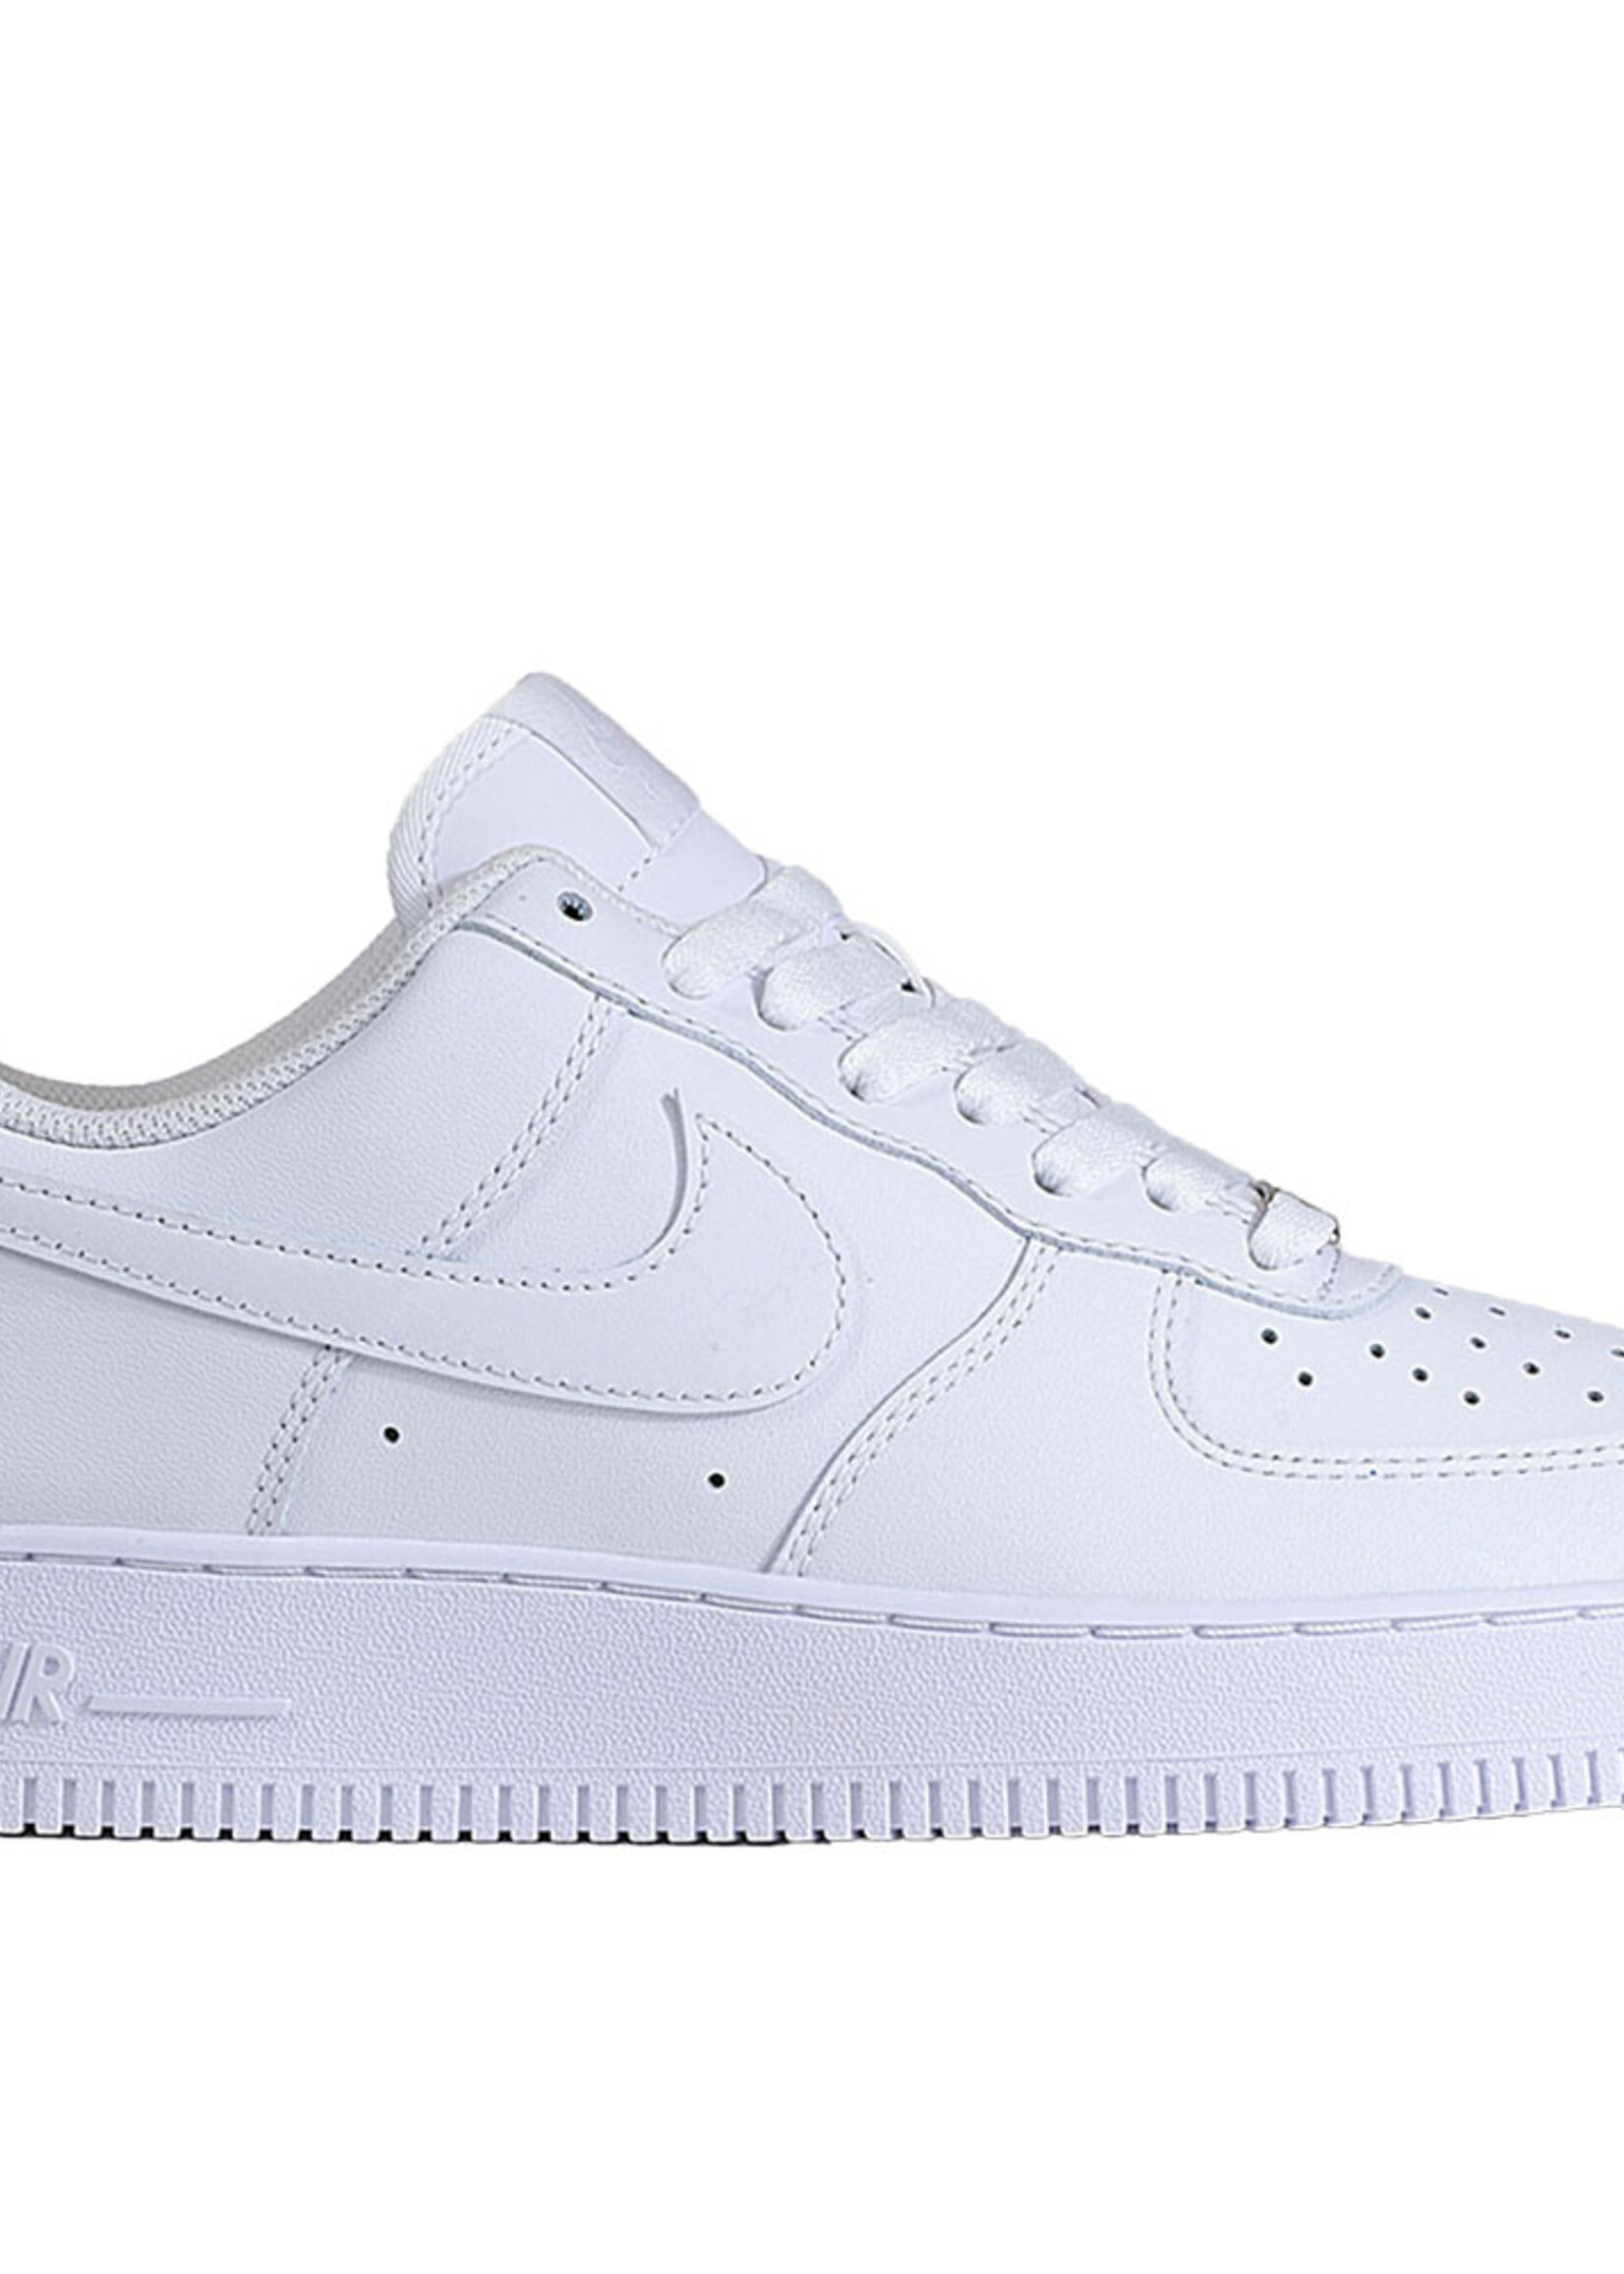 Nike Air Force 1 '07 Wit